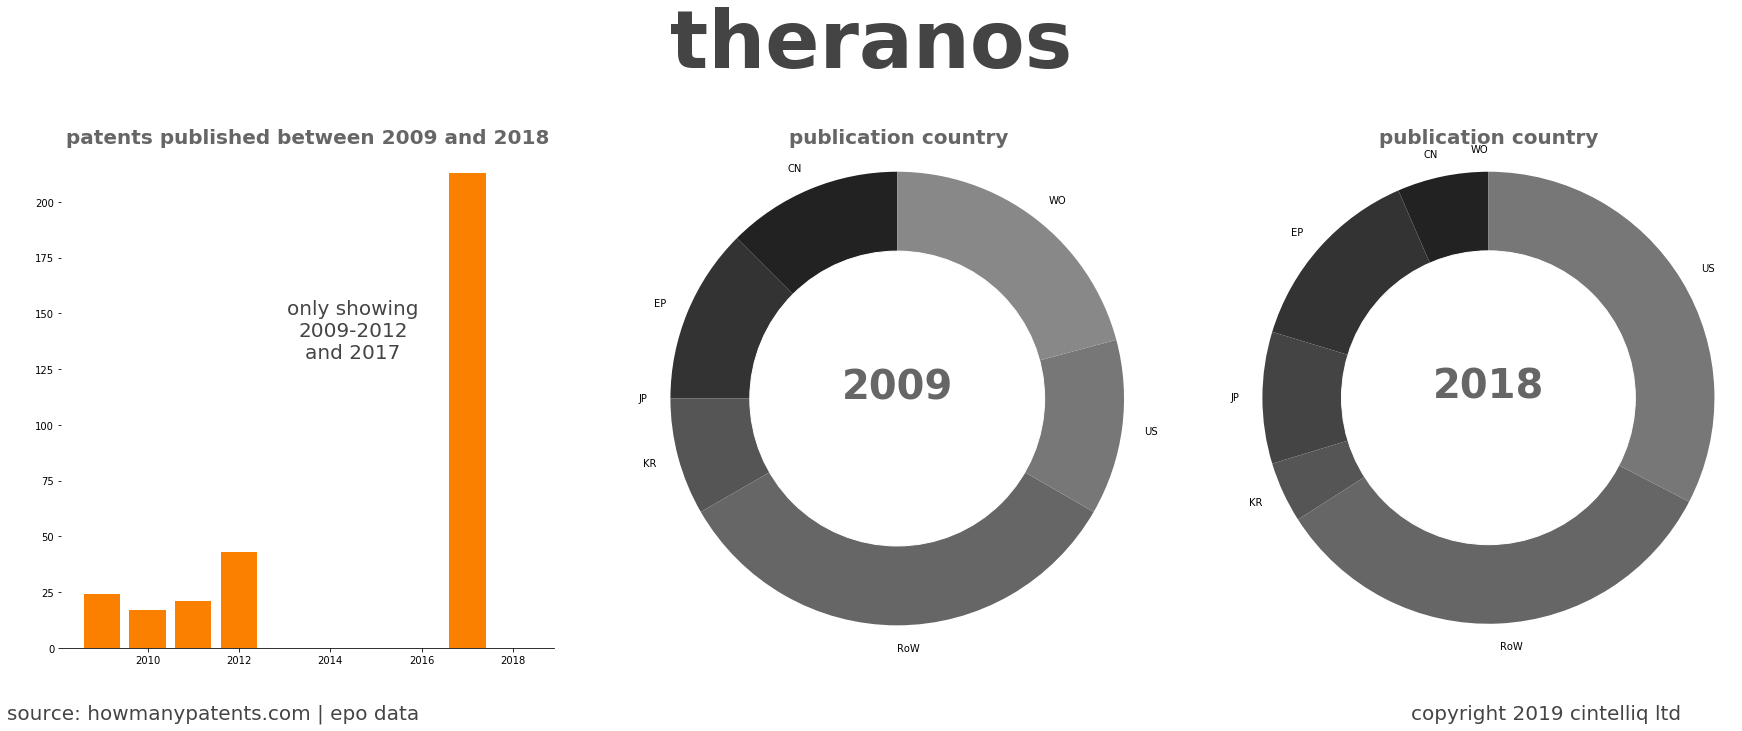 summary of patents for Theranos